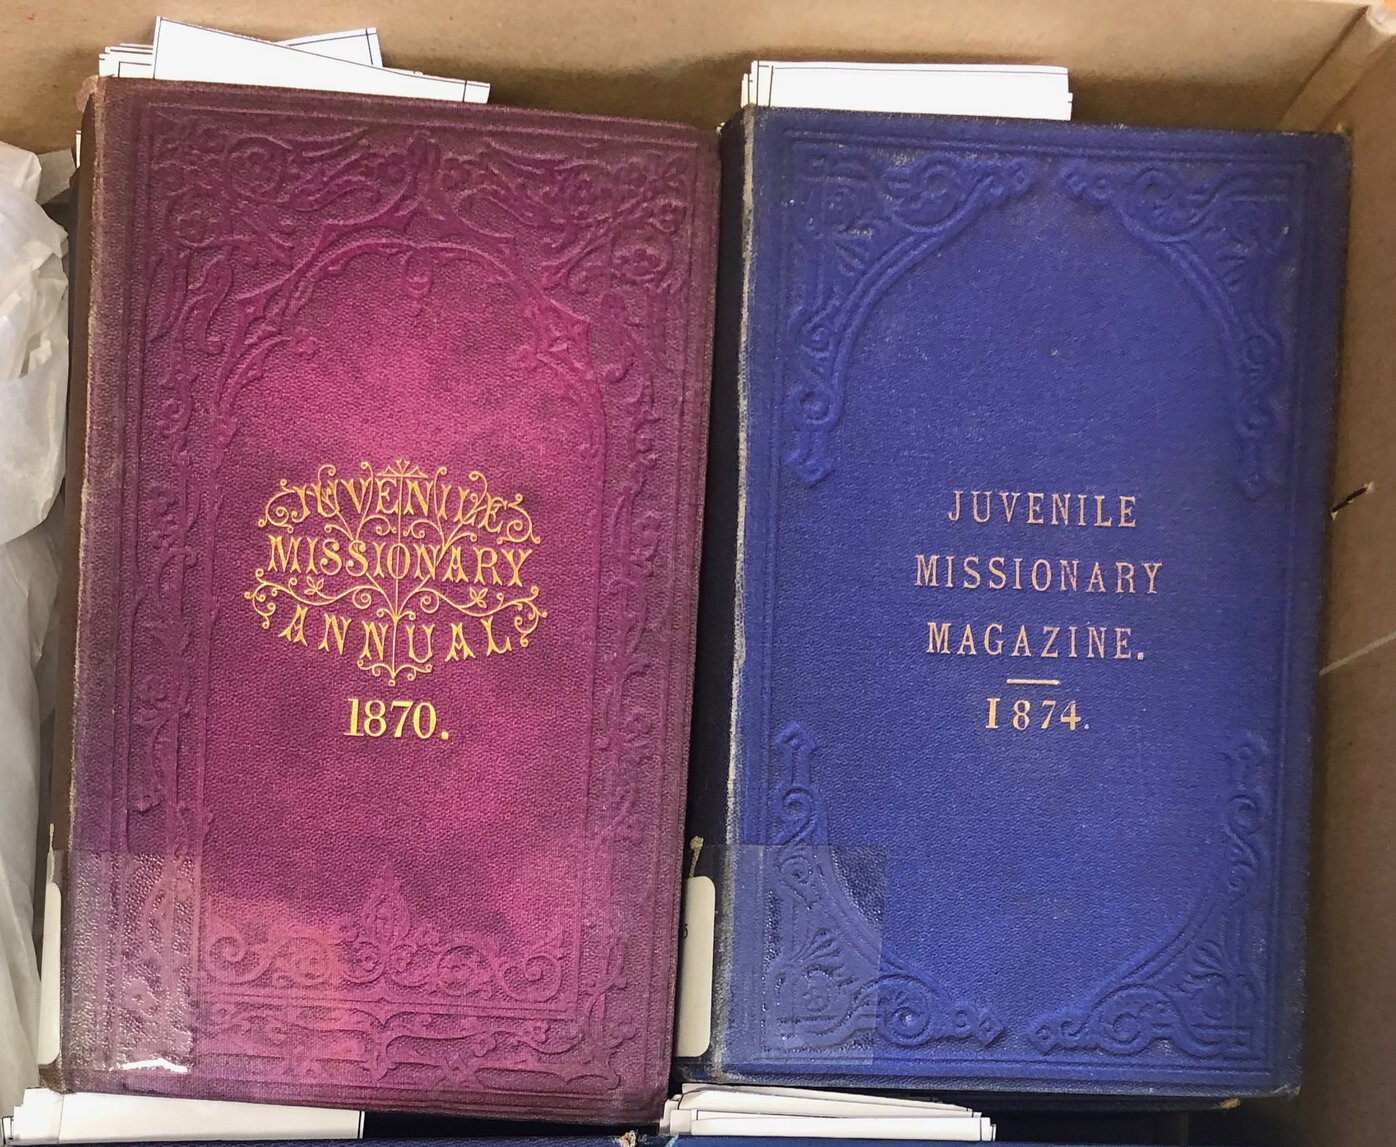 Volumes of Juvenile Missionary Annual (1870) and Juvenile Missionary Magazine (1874) side by side.